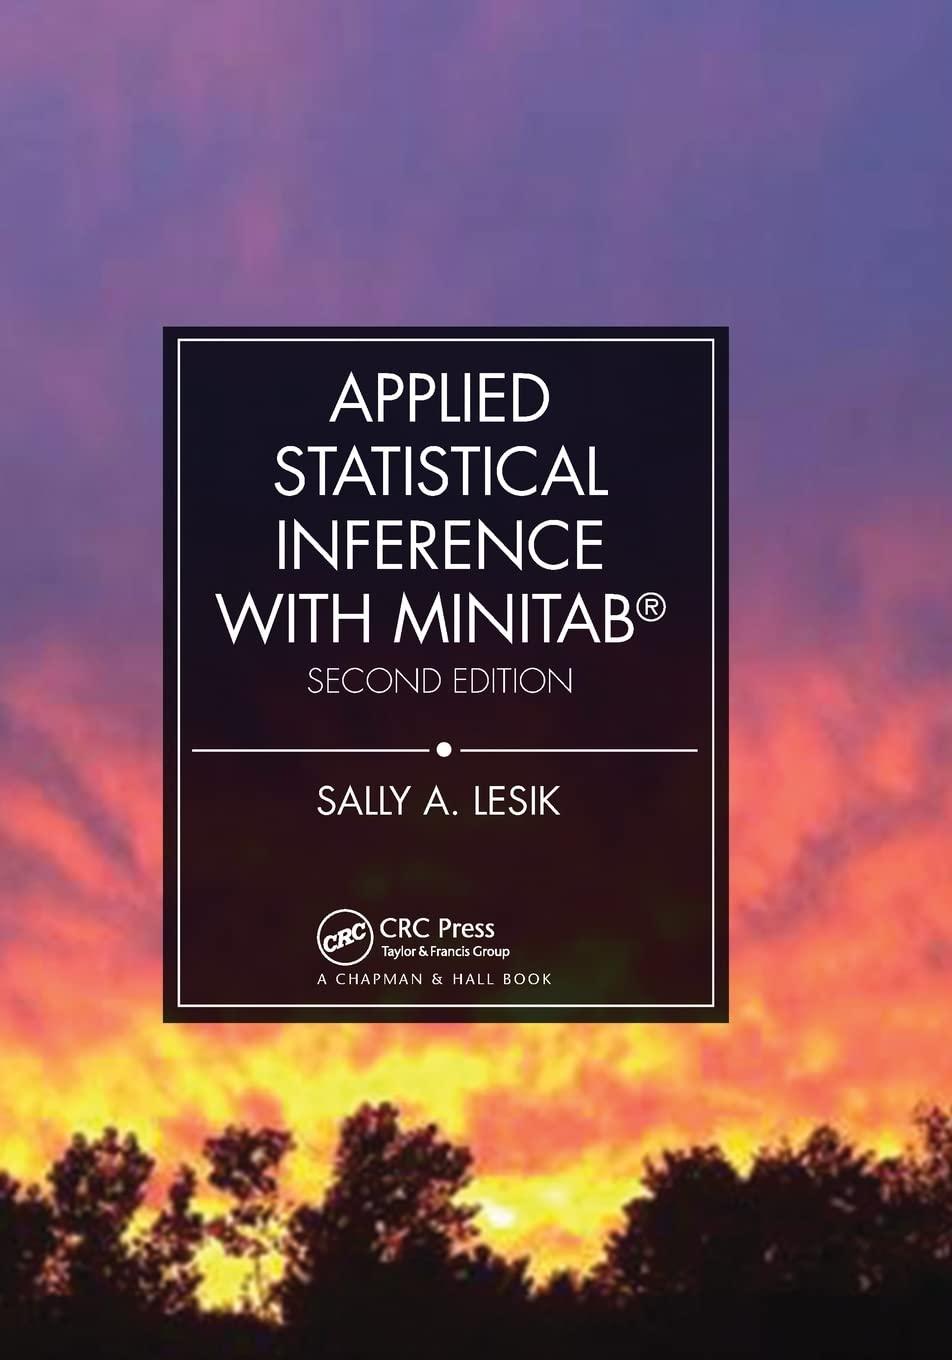 Applied Statistical Inference With MINITAB